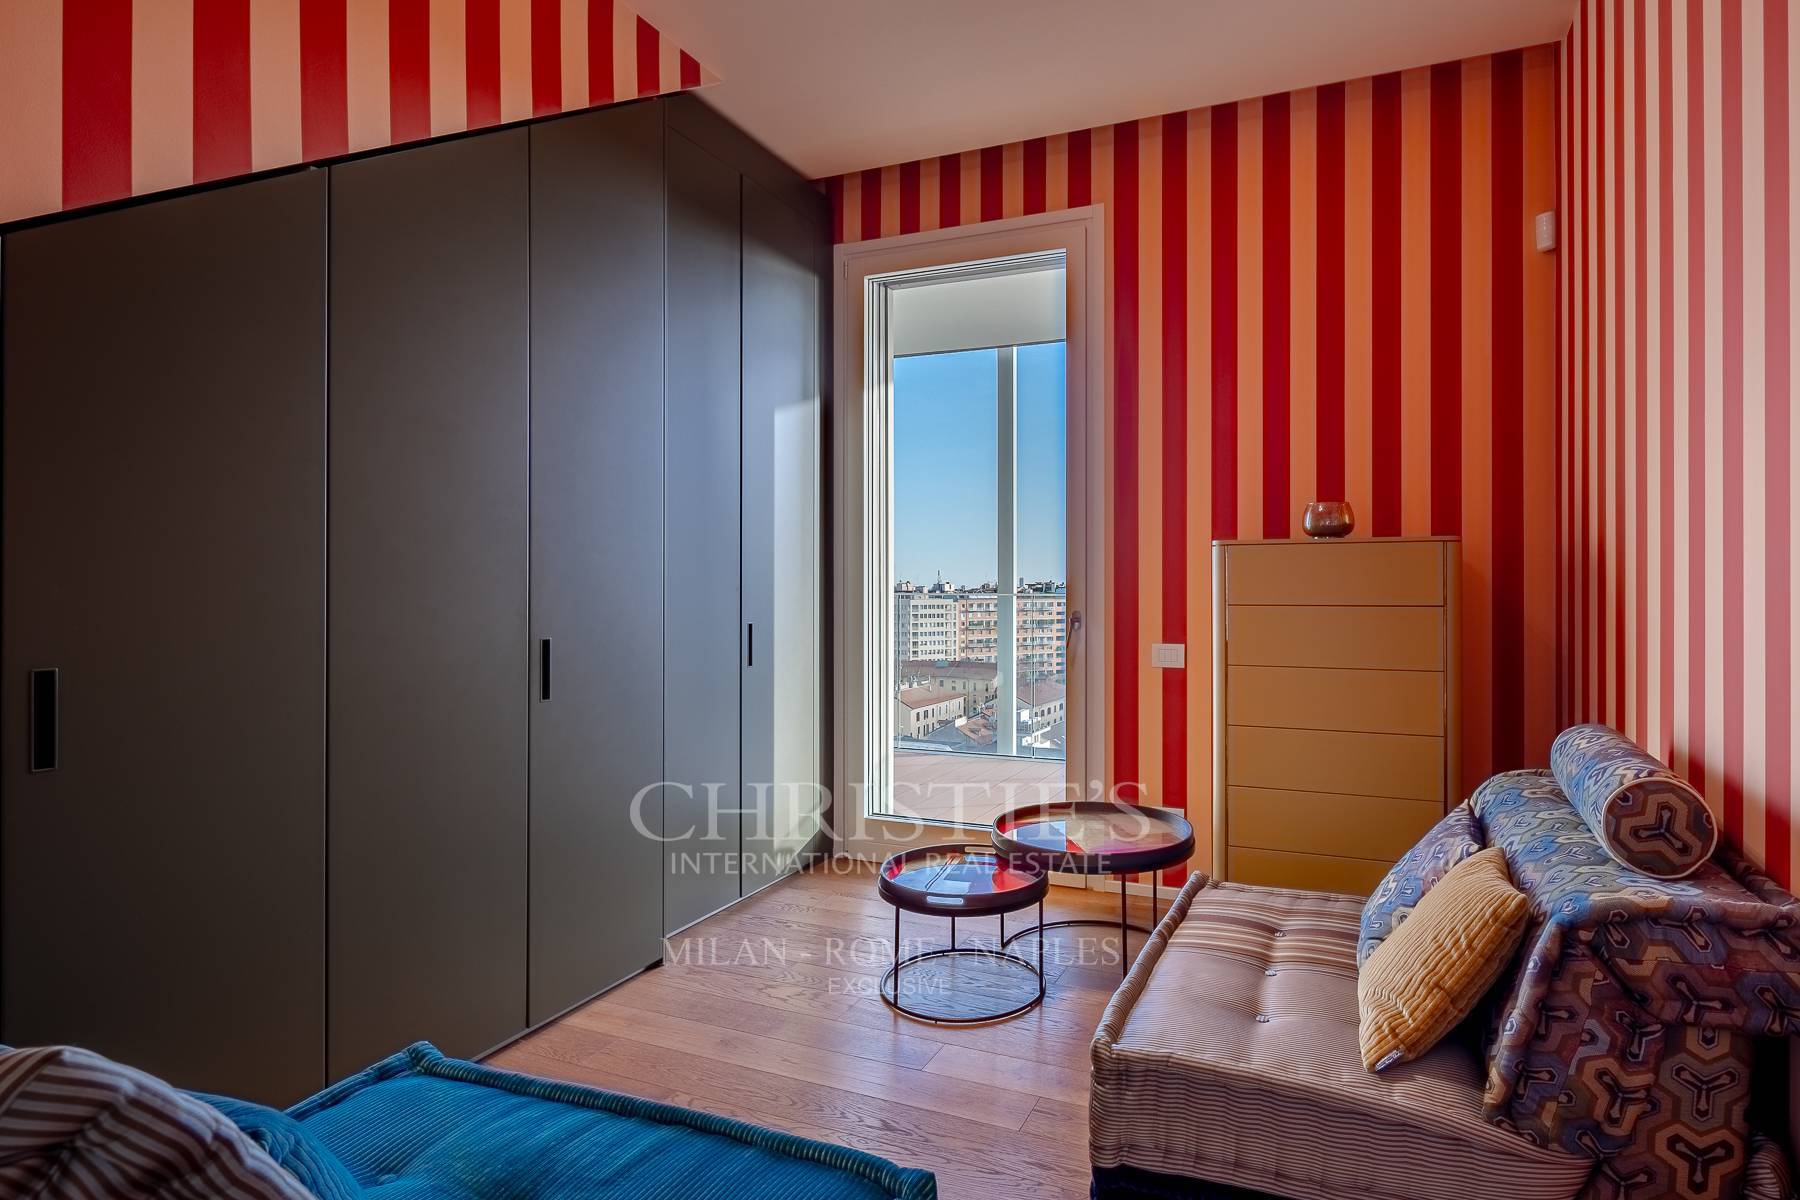 picture of Apartment In The "giardini D'inverno" Building With View Of The Milan Skyline